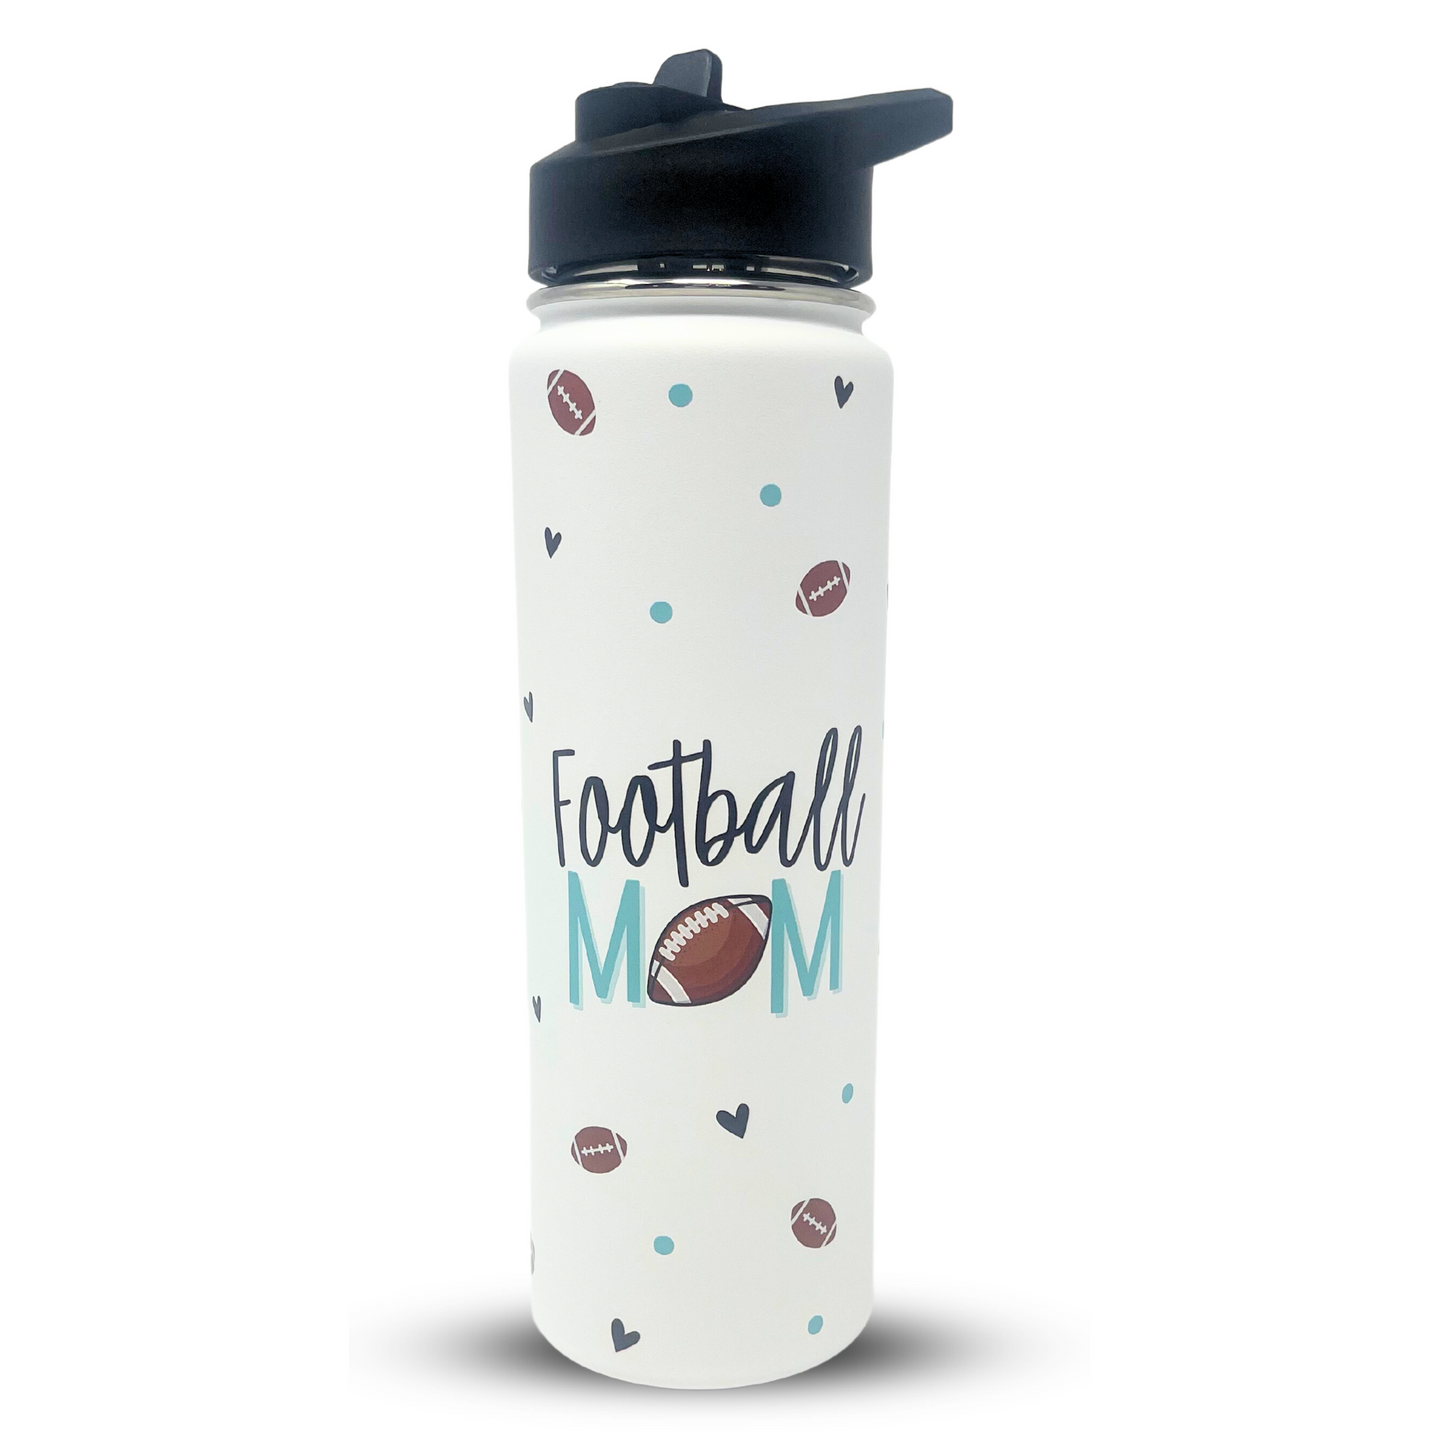 Brooke & Jess Designs Football Mom Tumbler Gifts - Large Insulated Water Bottle with Straw - Stainless Steel Metal 24 oz Travel Cup for Mom, Mama, Mother, Wife, Women | Keeps Hot and Cold for Hours